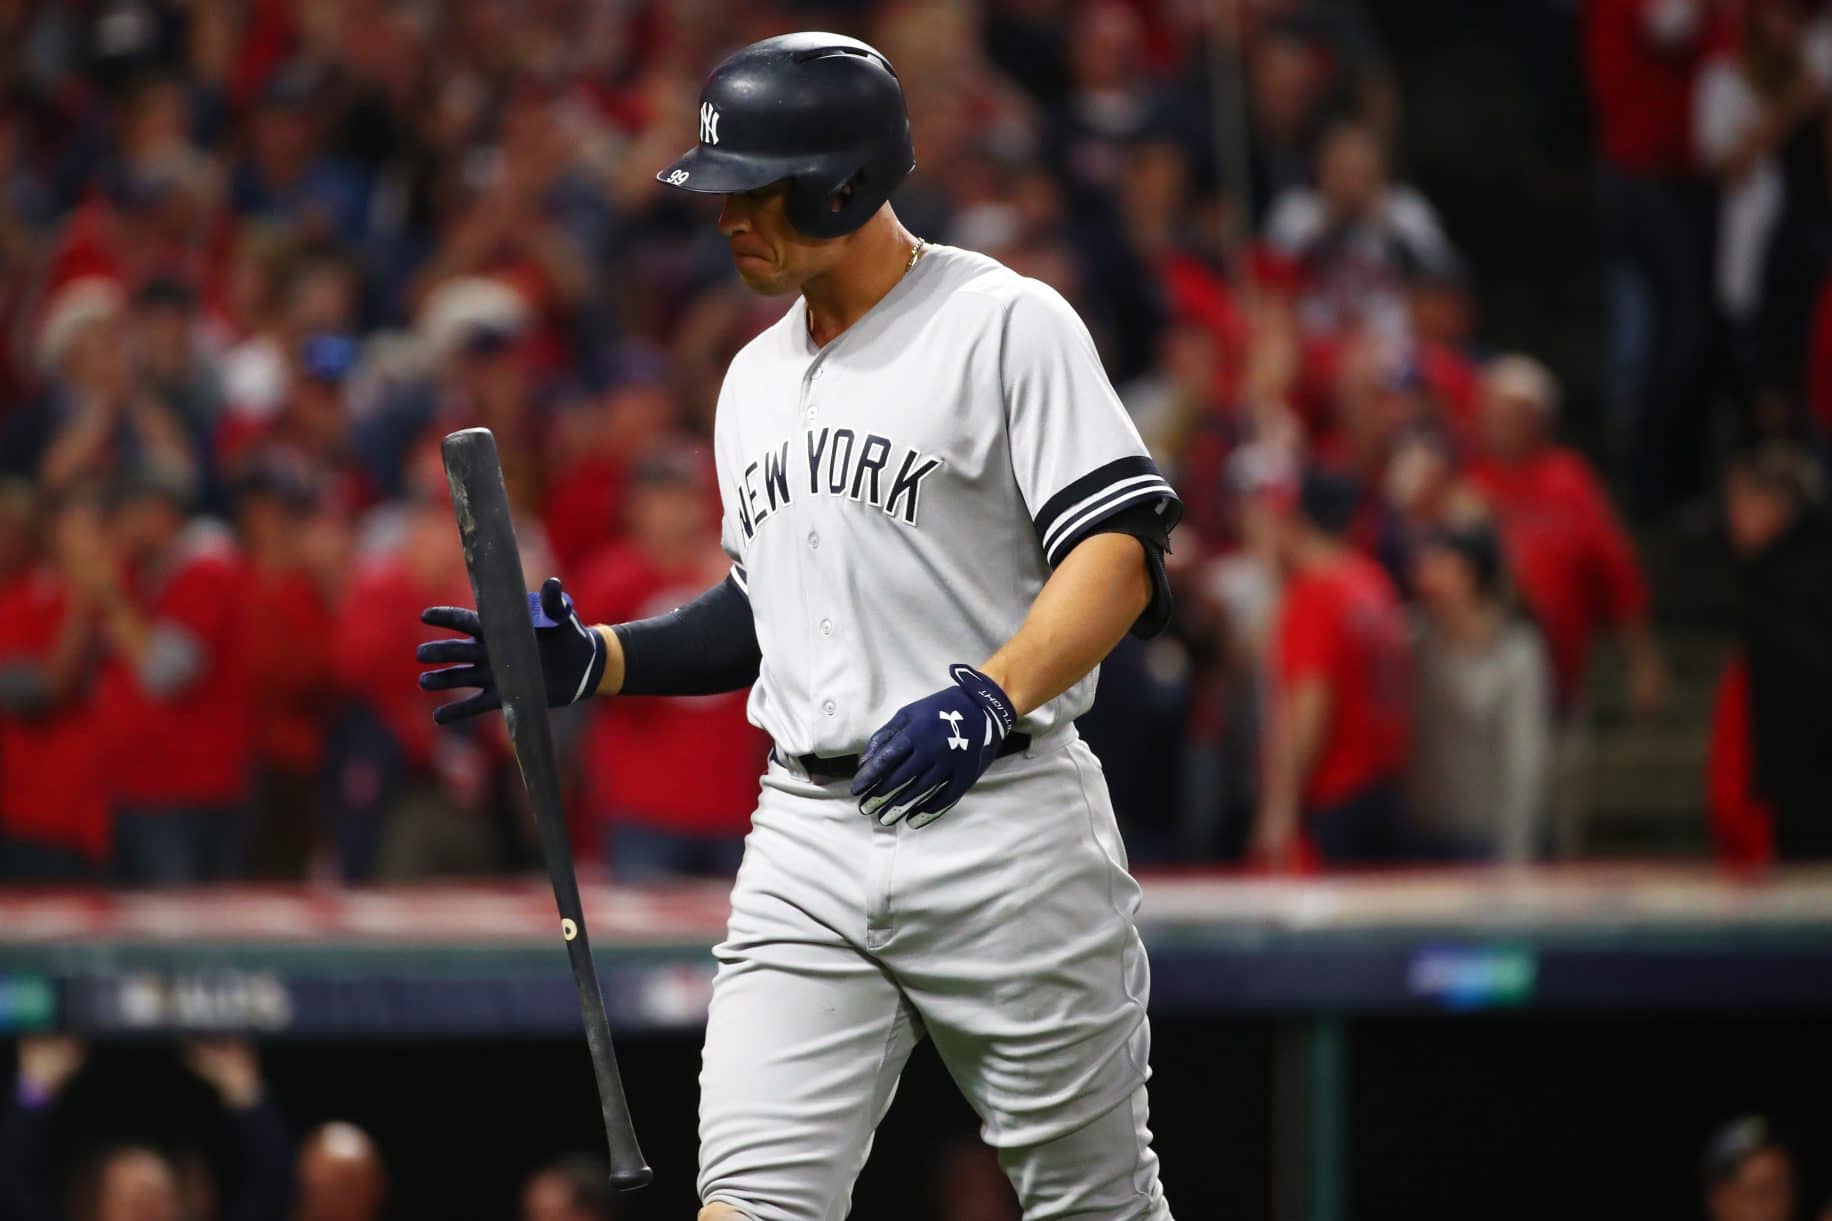 New York Yankees: Playoff Glory Won't Come If Aaron Judge Continues Patient Approach 2